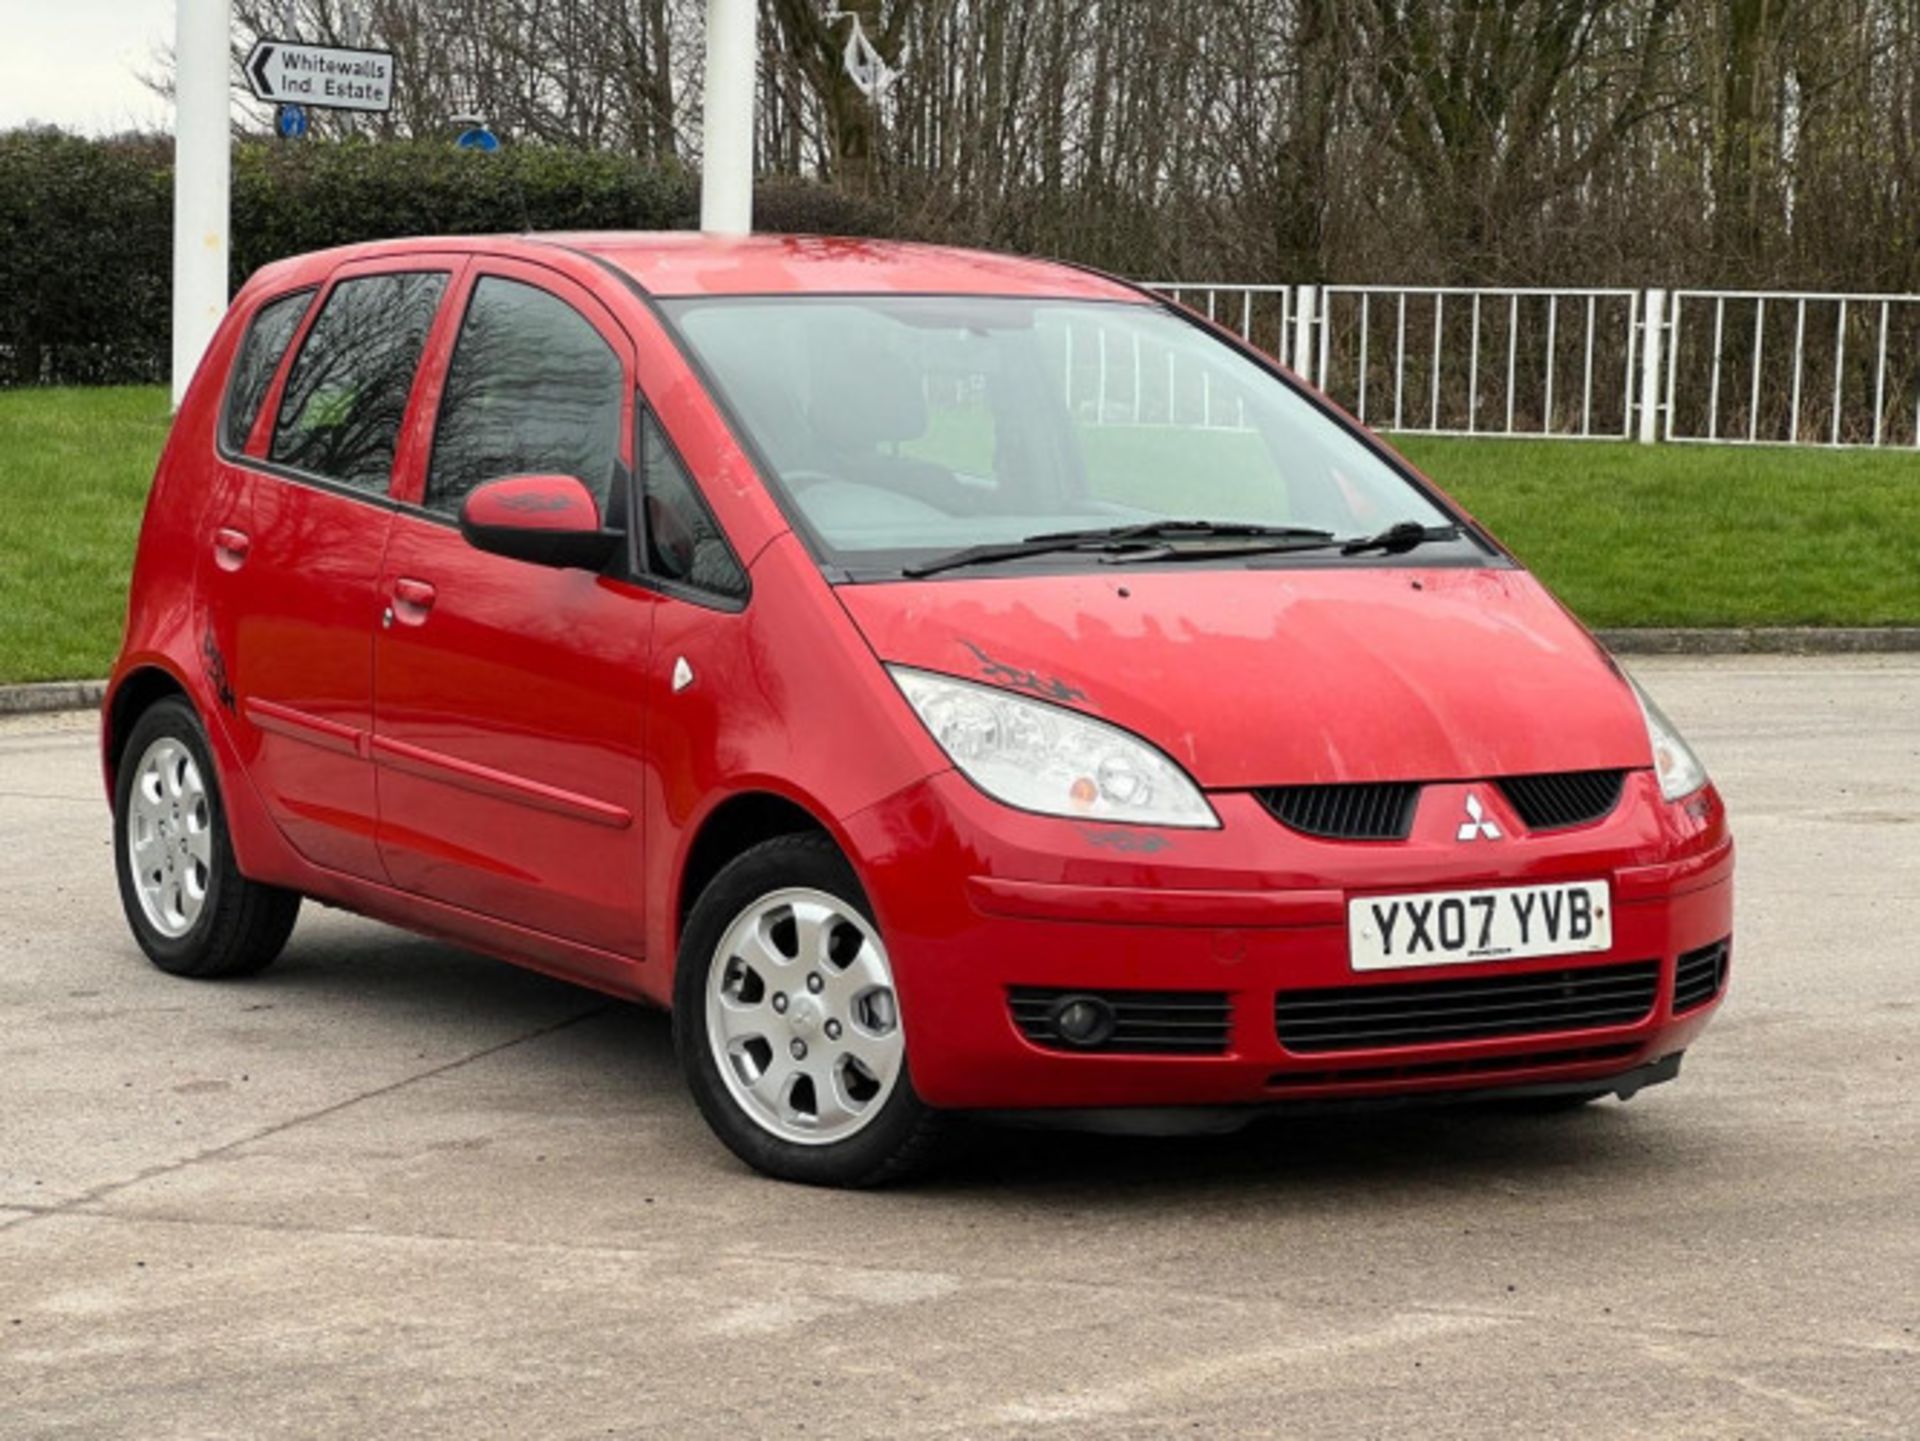 2007 MITSUBISHI COLT 1.5 DI-D DIESEL AUTOMATIC >>--NO VAT ON HAMMER--<< - Image 115 of 127